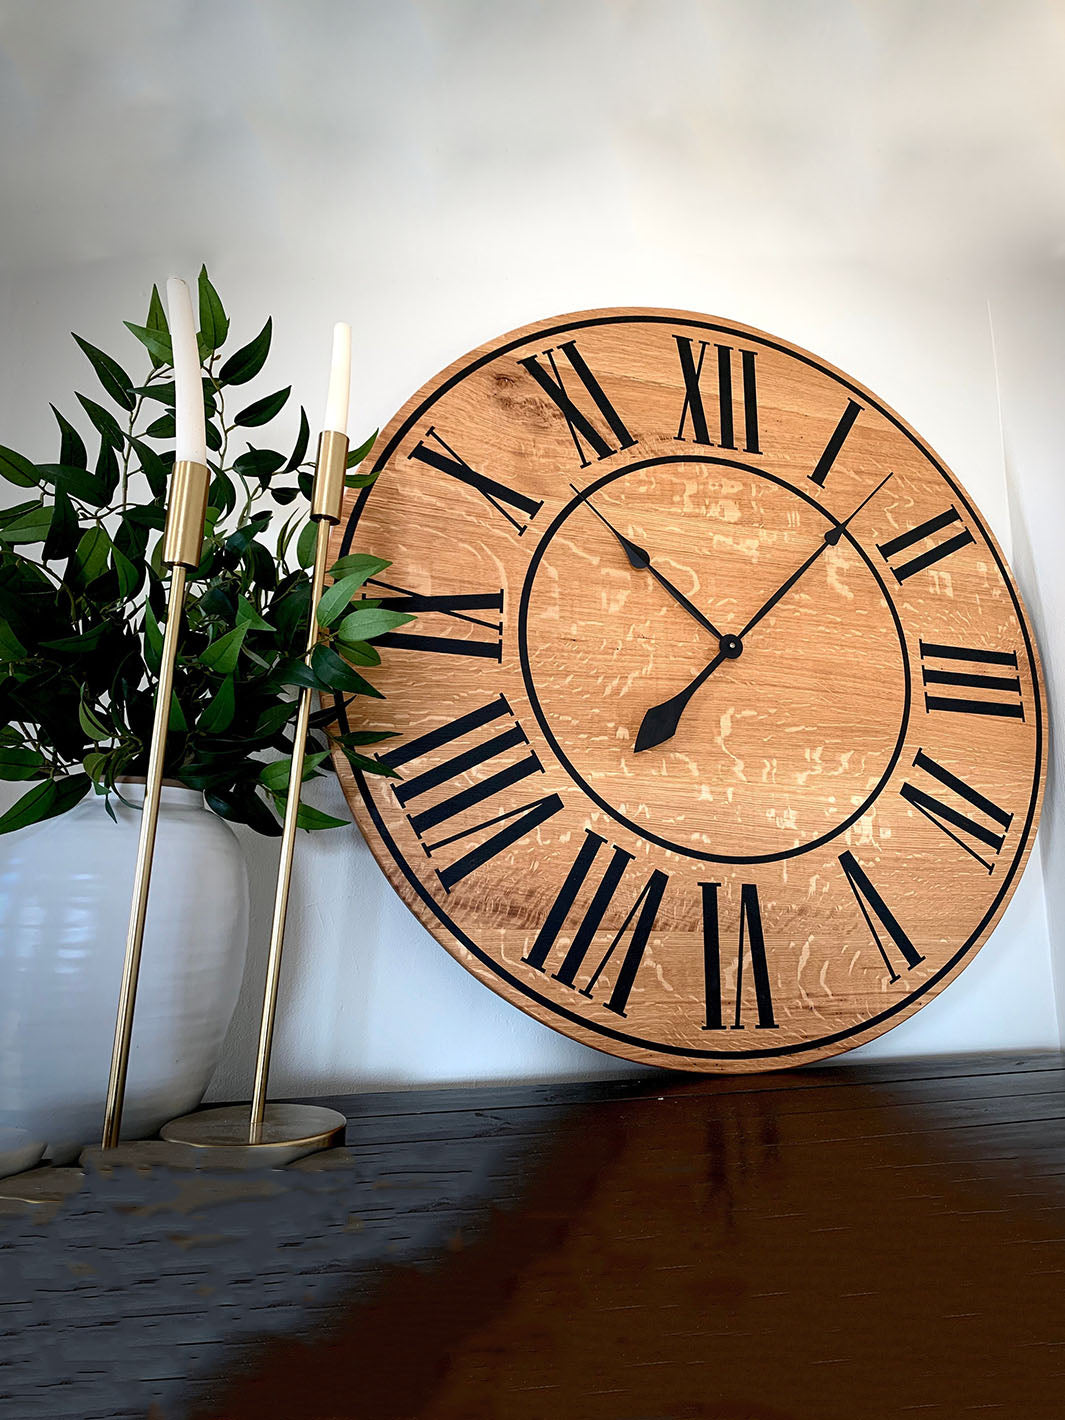 Large Quartersawn White Oak Wall Clock with Black Lines and Roman Numerals Earthly Comfort Clocks 503-3